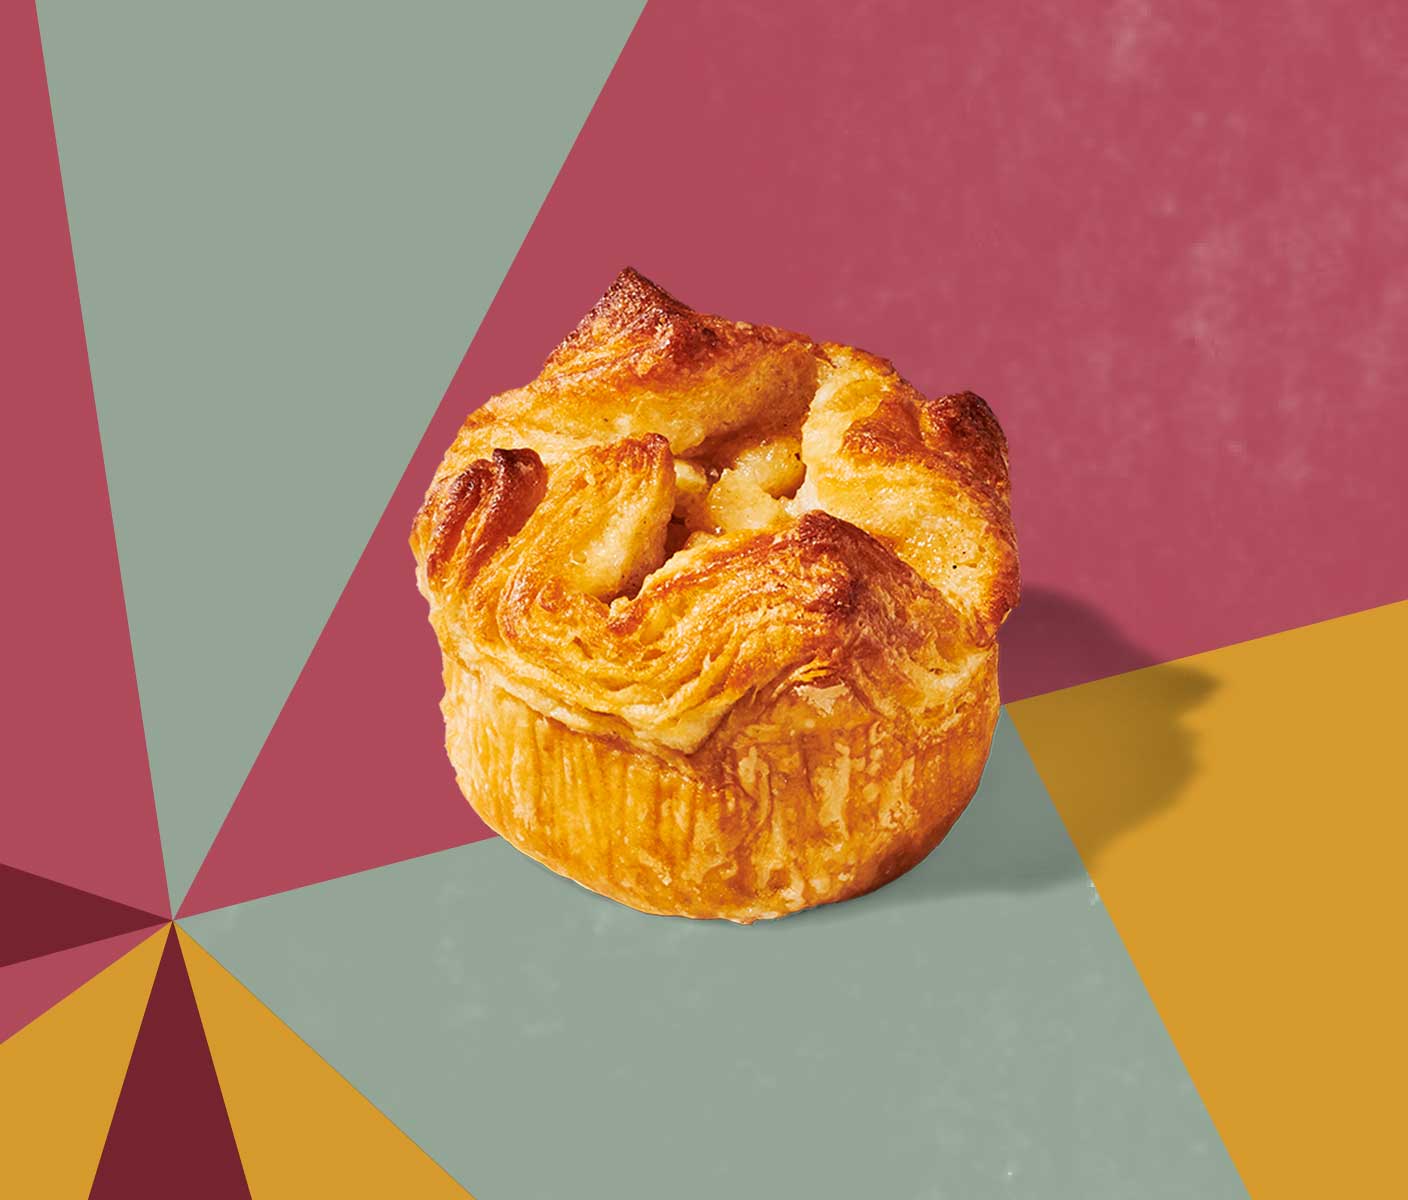 A round, flaky pastry with a wavy texture on top set against a geometric pattern.